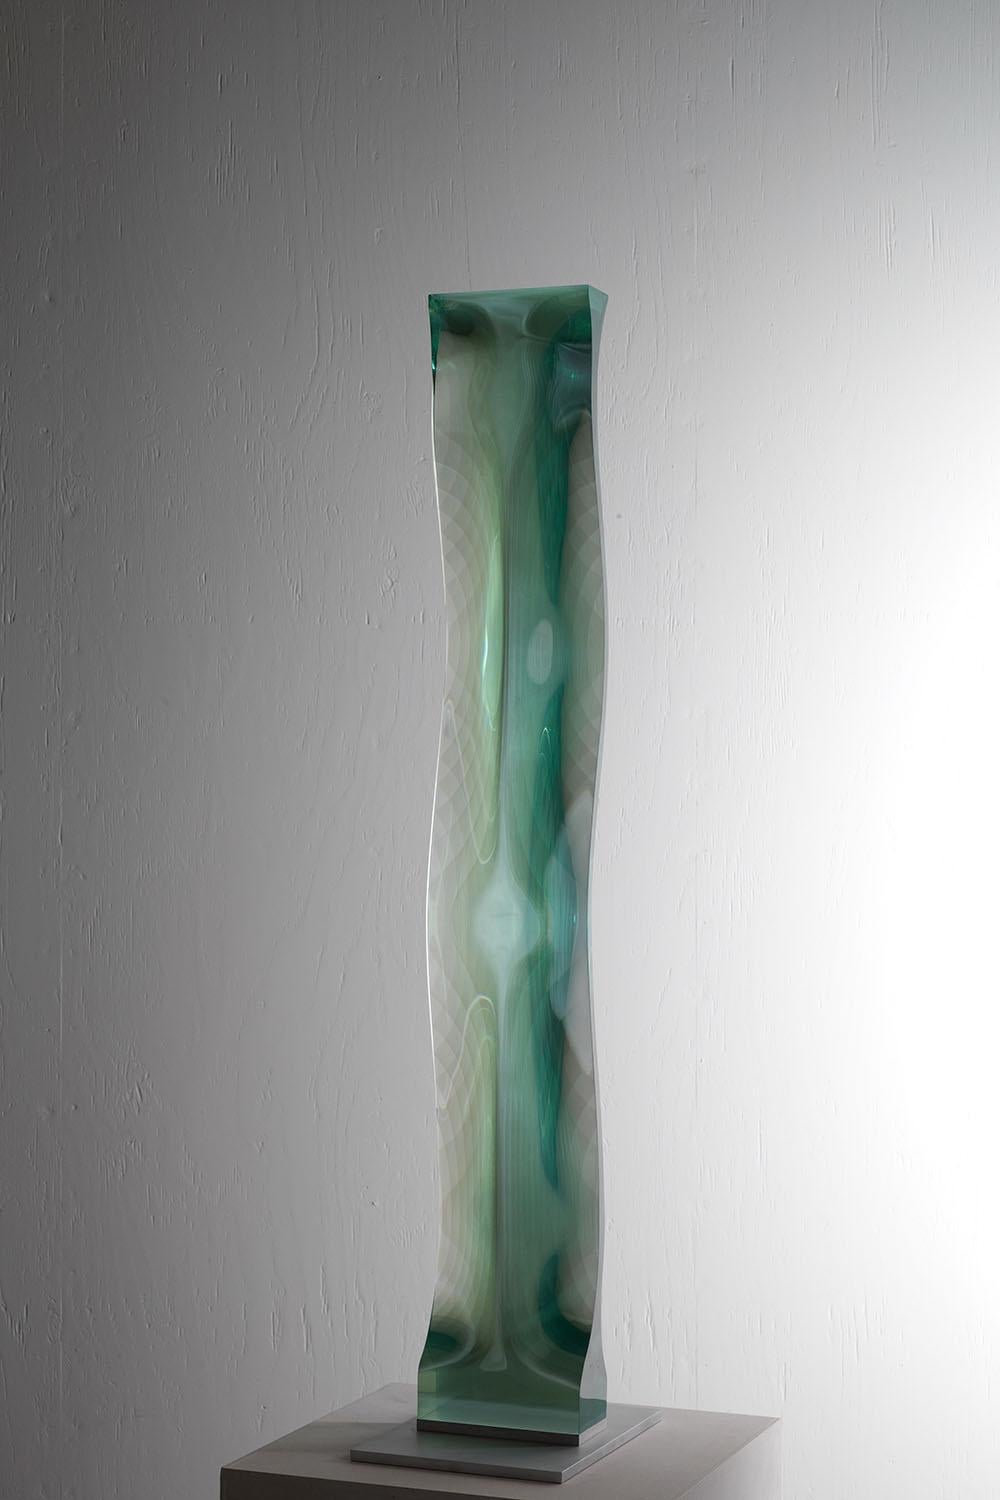 M.080601 by Toshio Iezumi - Contemporary glass sculpture, green, abstract, long For Sale 2